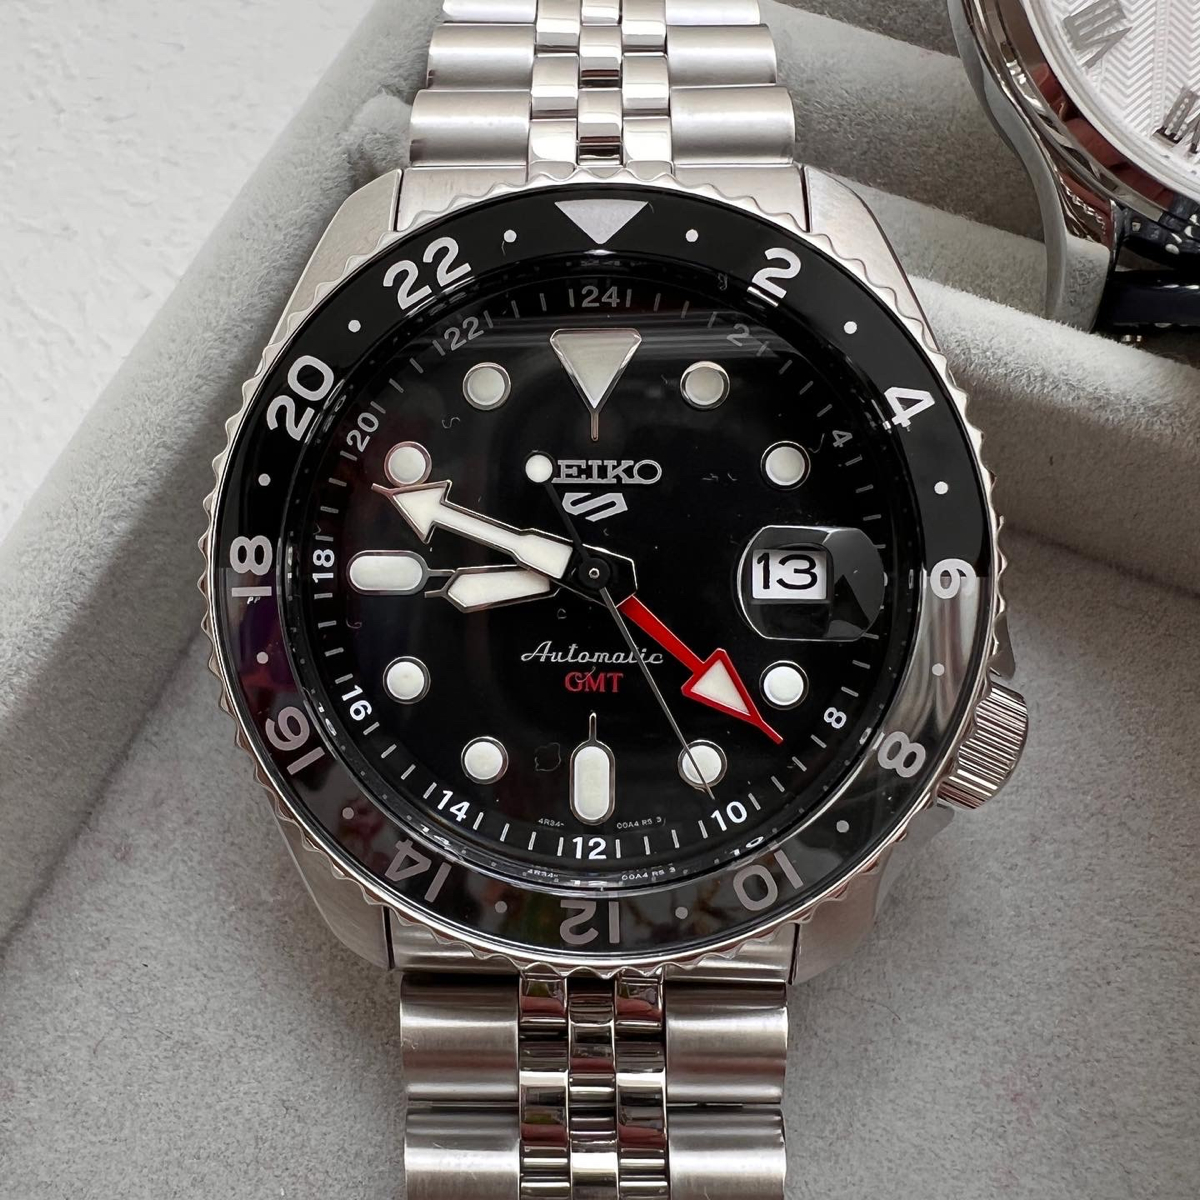 Seiko 5 GMT SSK001 Review - Watch Clicker